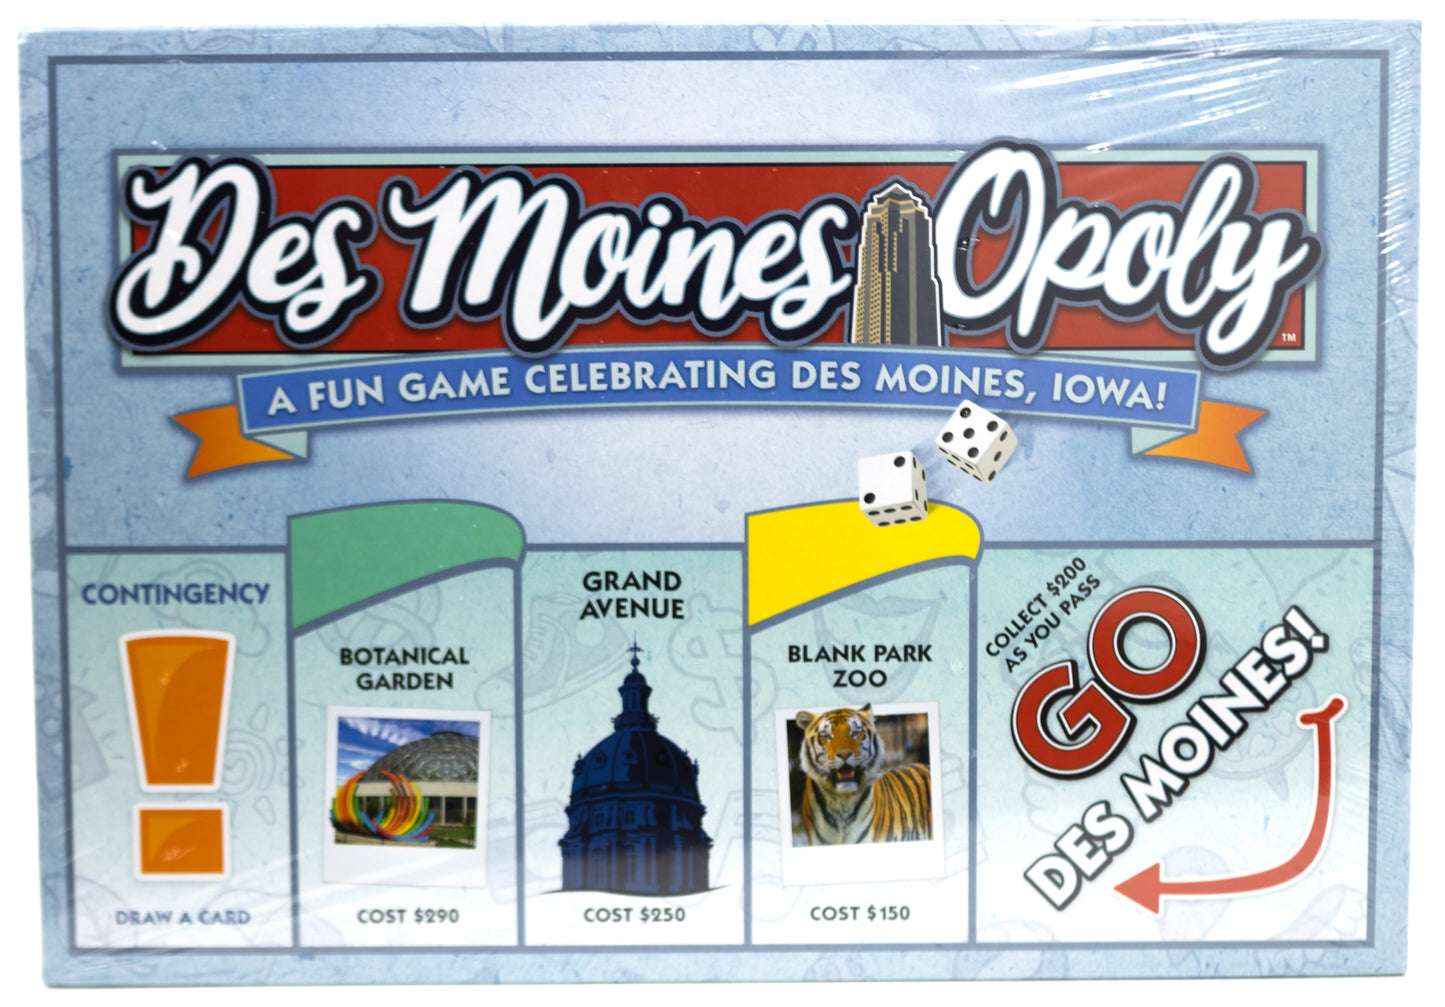 'Opoly Games